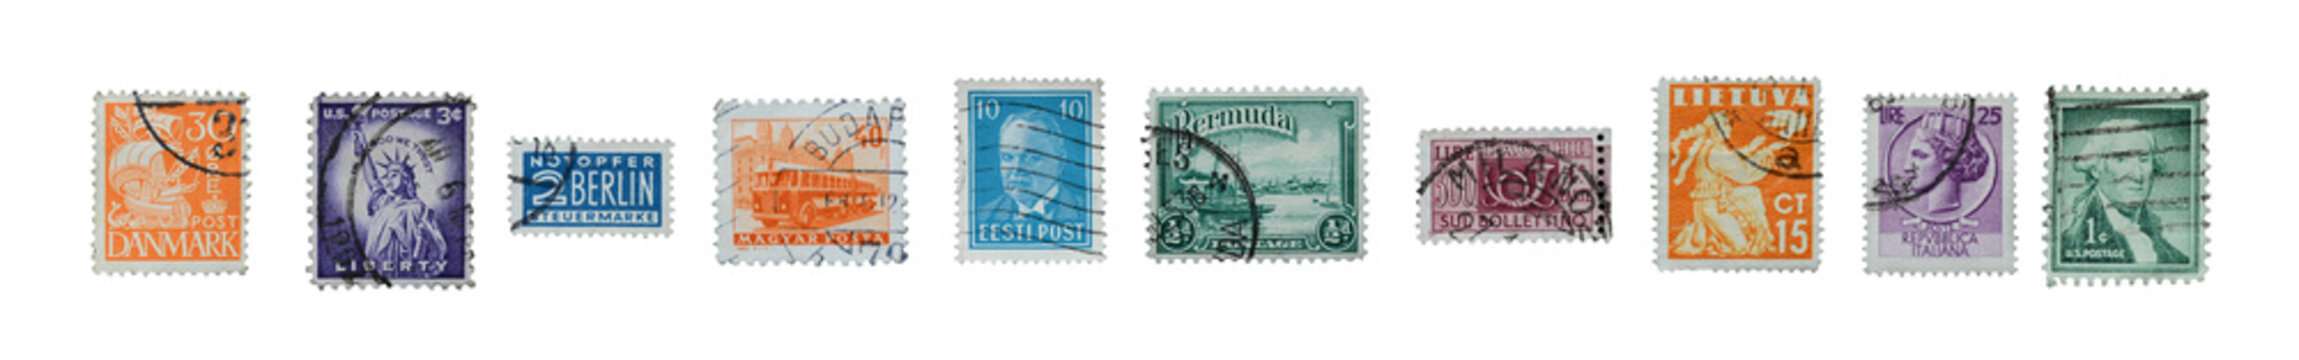 Stamps mail close up.